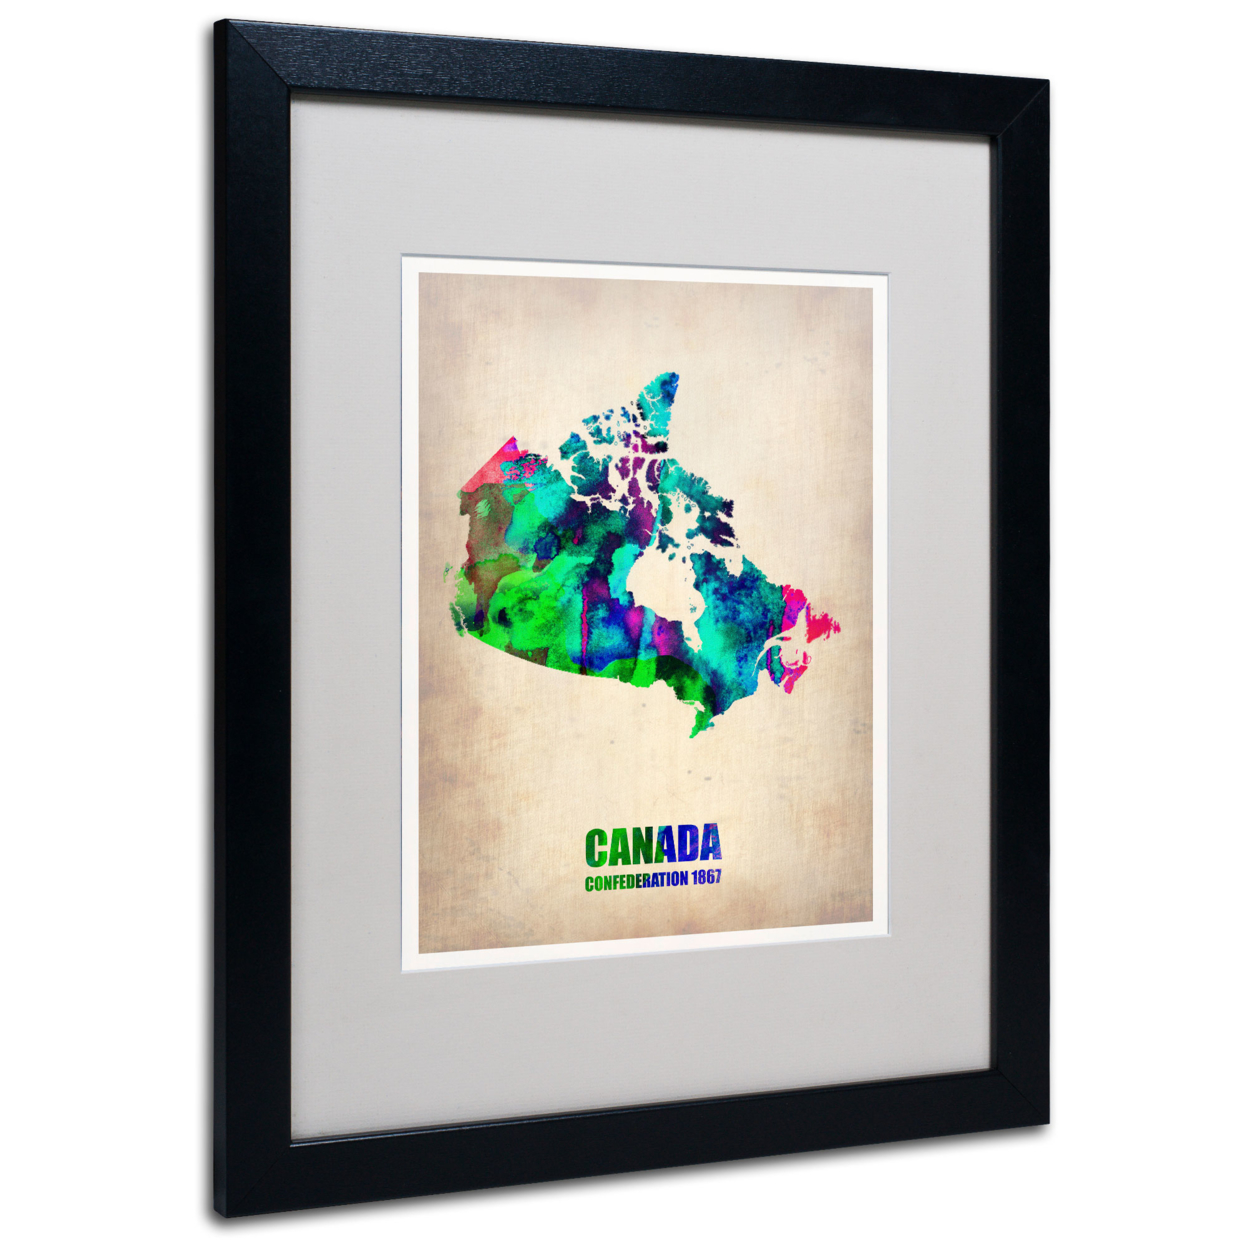 Naxart 'Canada Watercolor Map' Black Wooden Framed Art 18 X 22 Inches